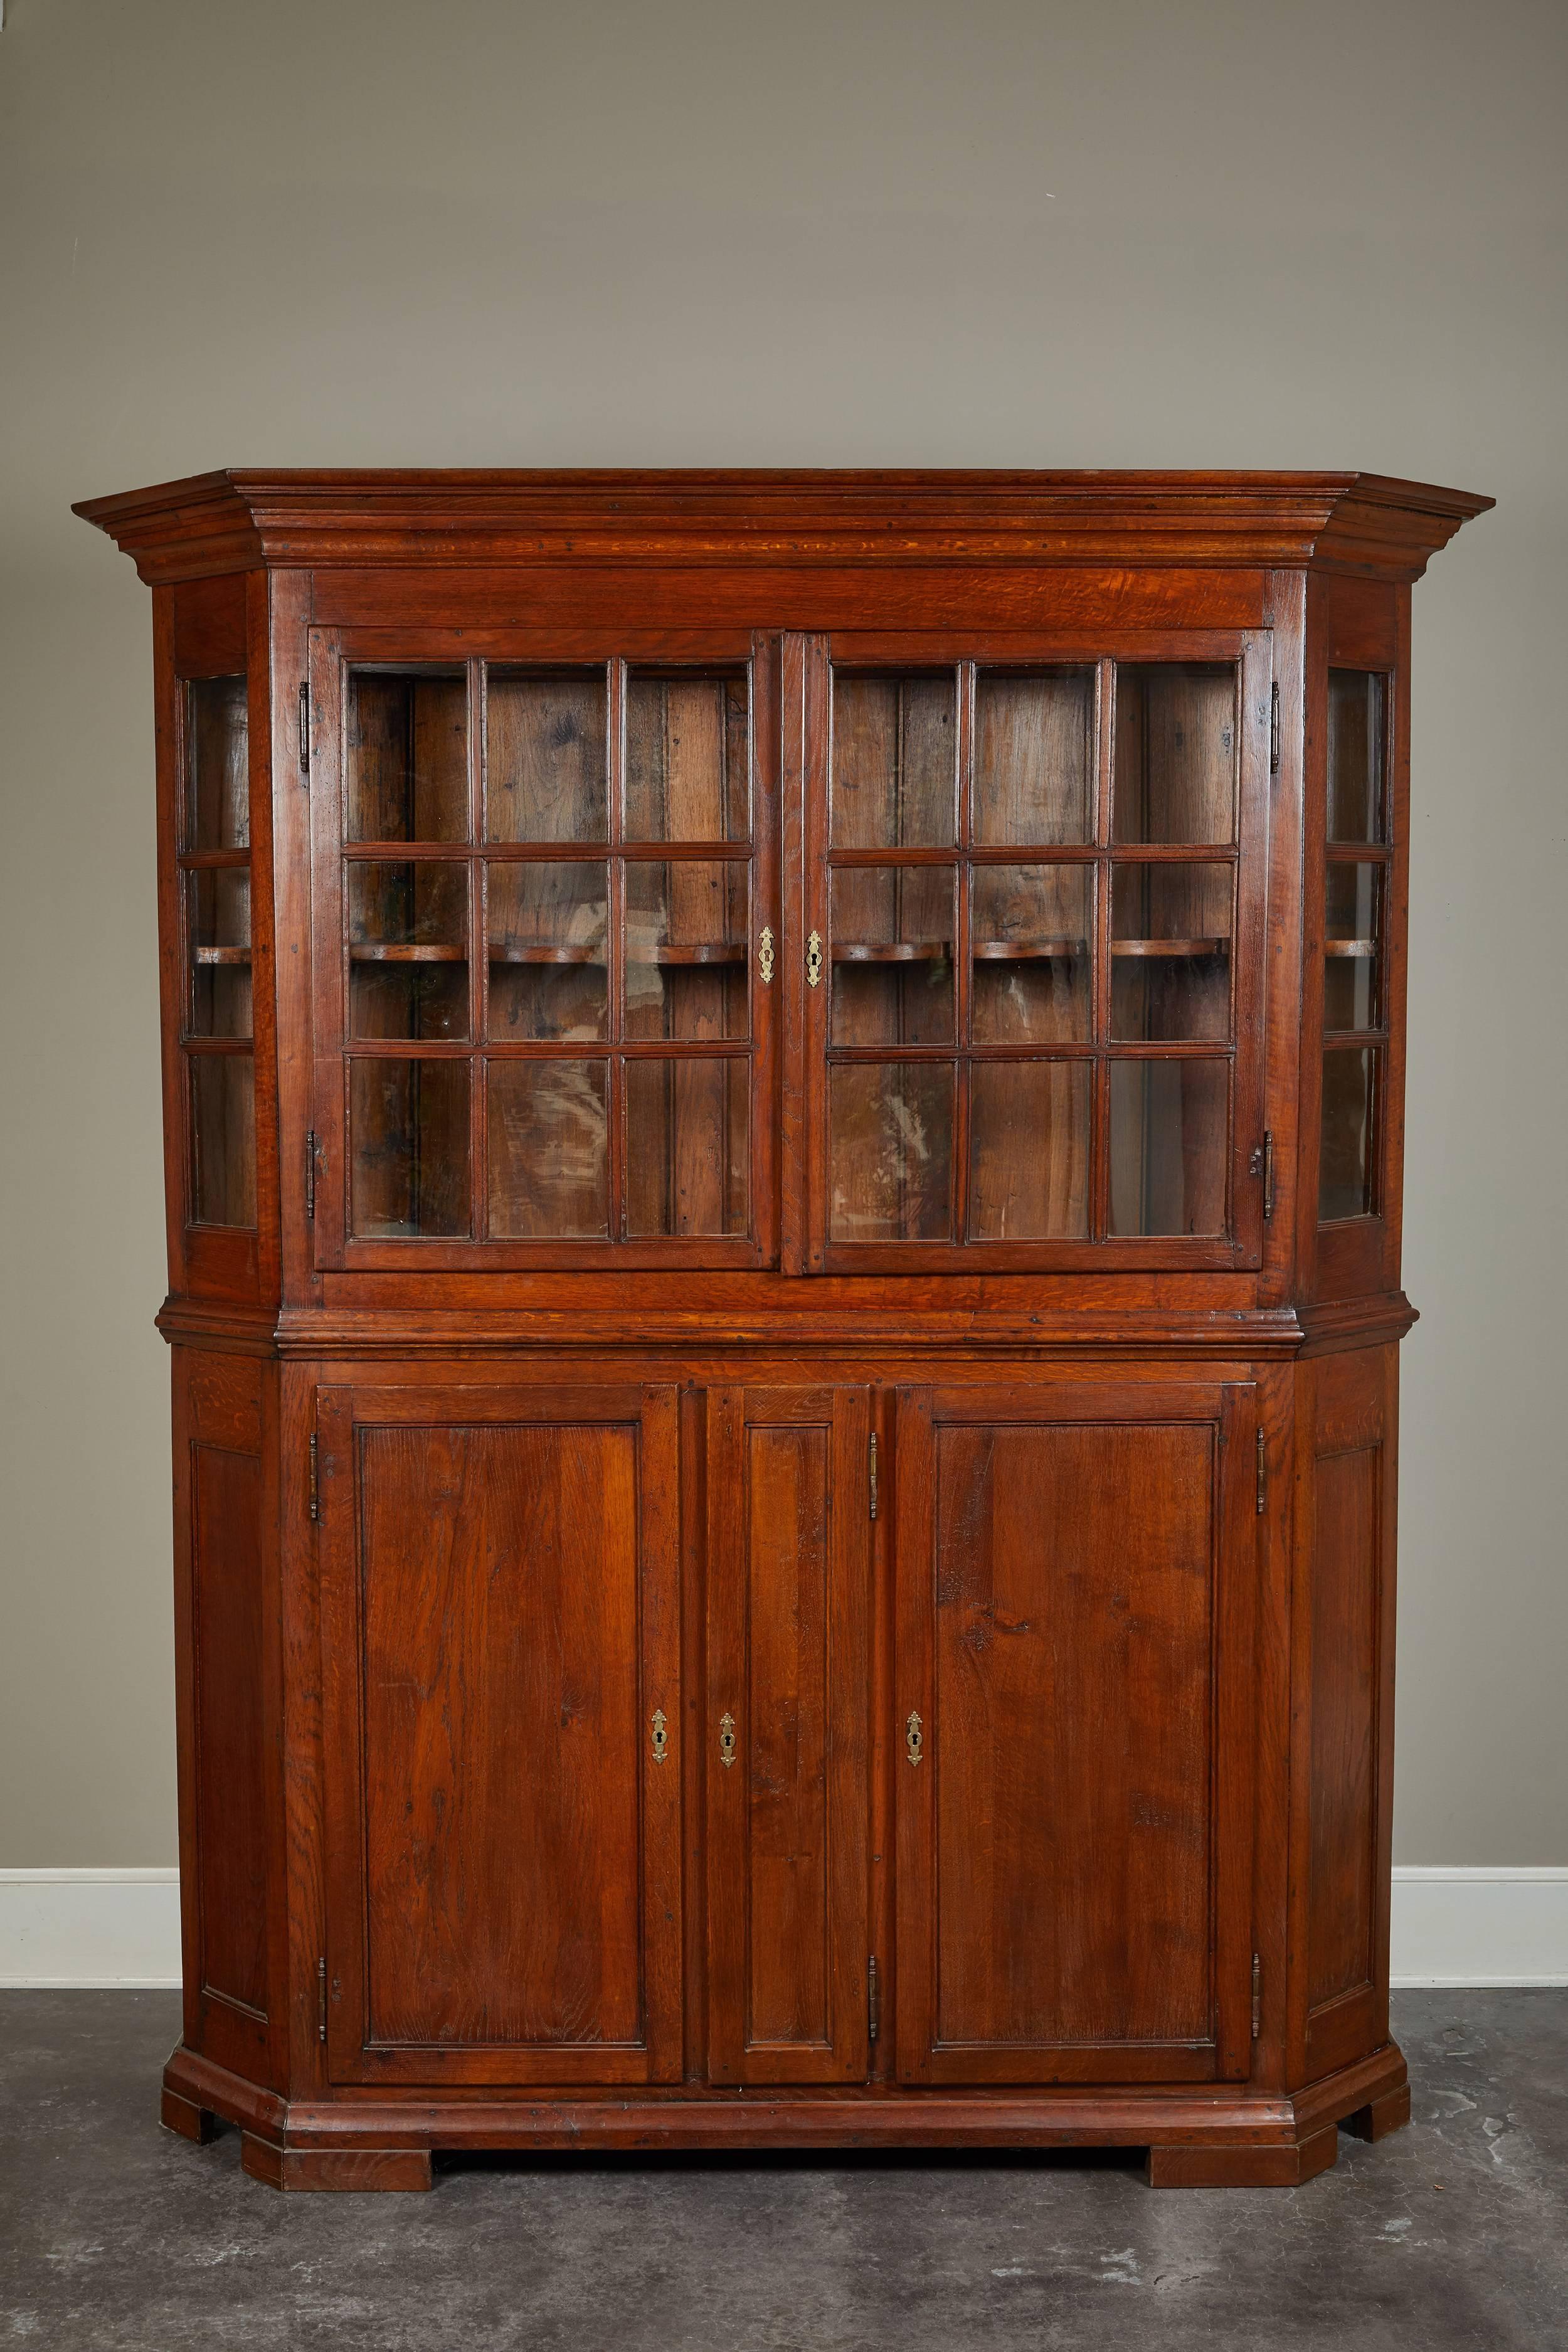 Danish baroque display cabinet, original glass and hardware, molded crown, top section consists of a pair of six paneled glass doors and two canted glass side panels enclosing one stationary centered shelf with scalloped edge and one “spoon shelf”.